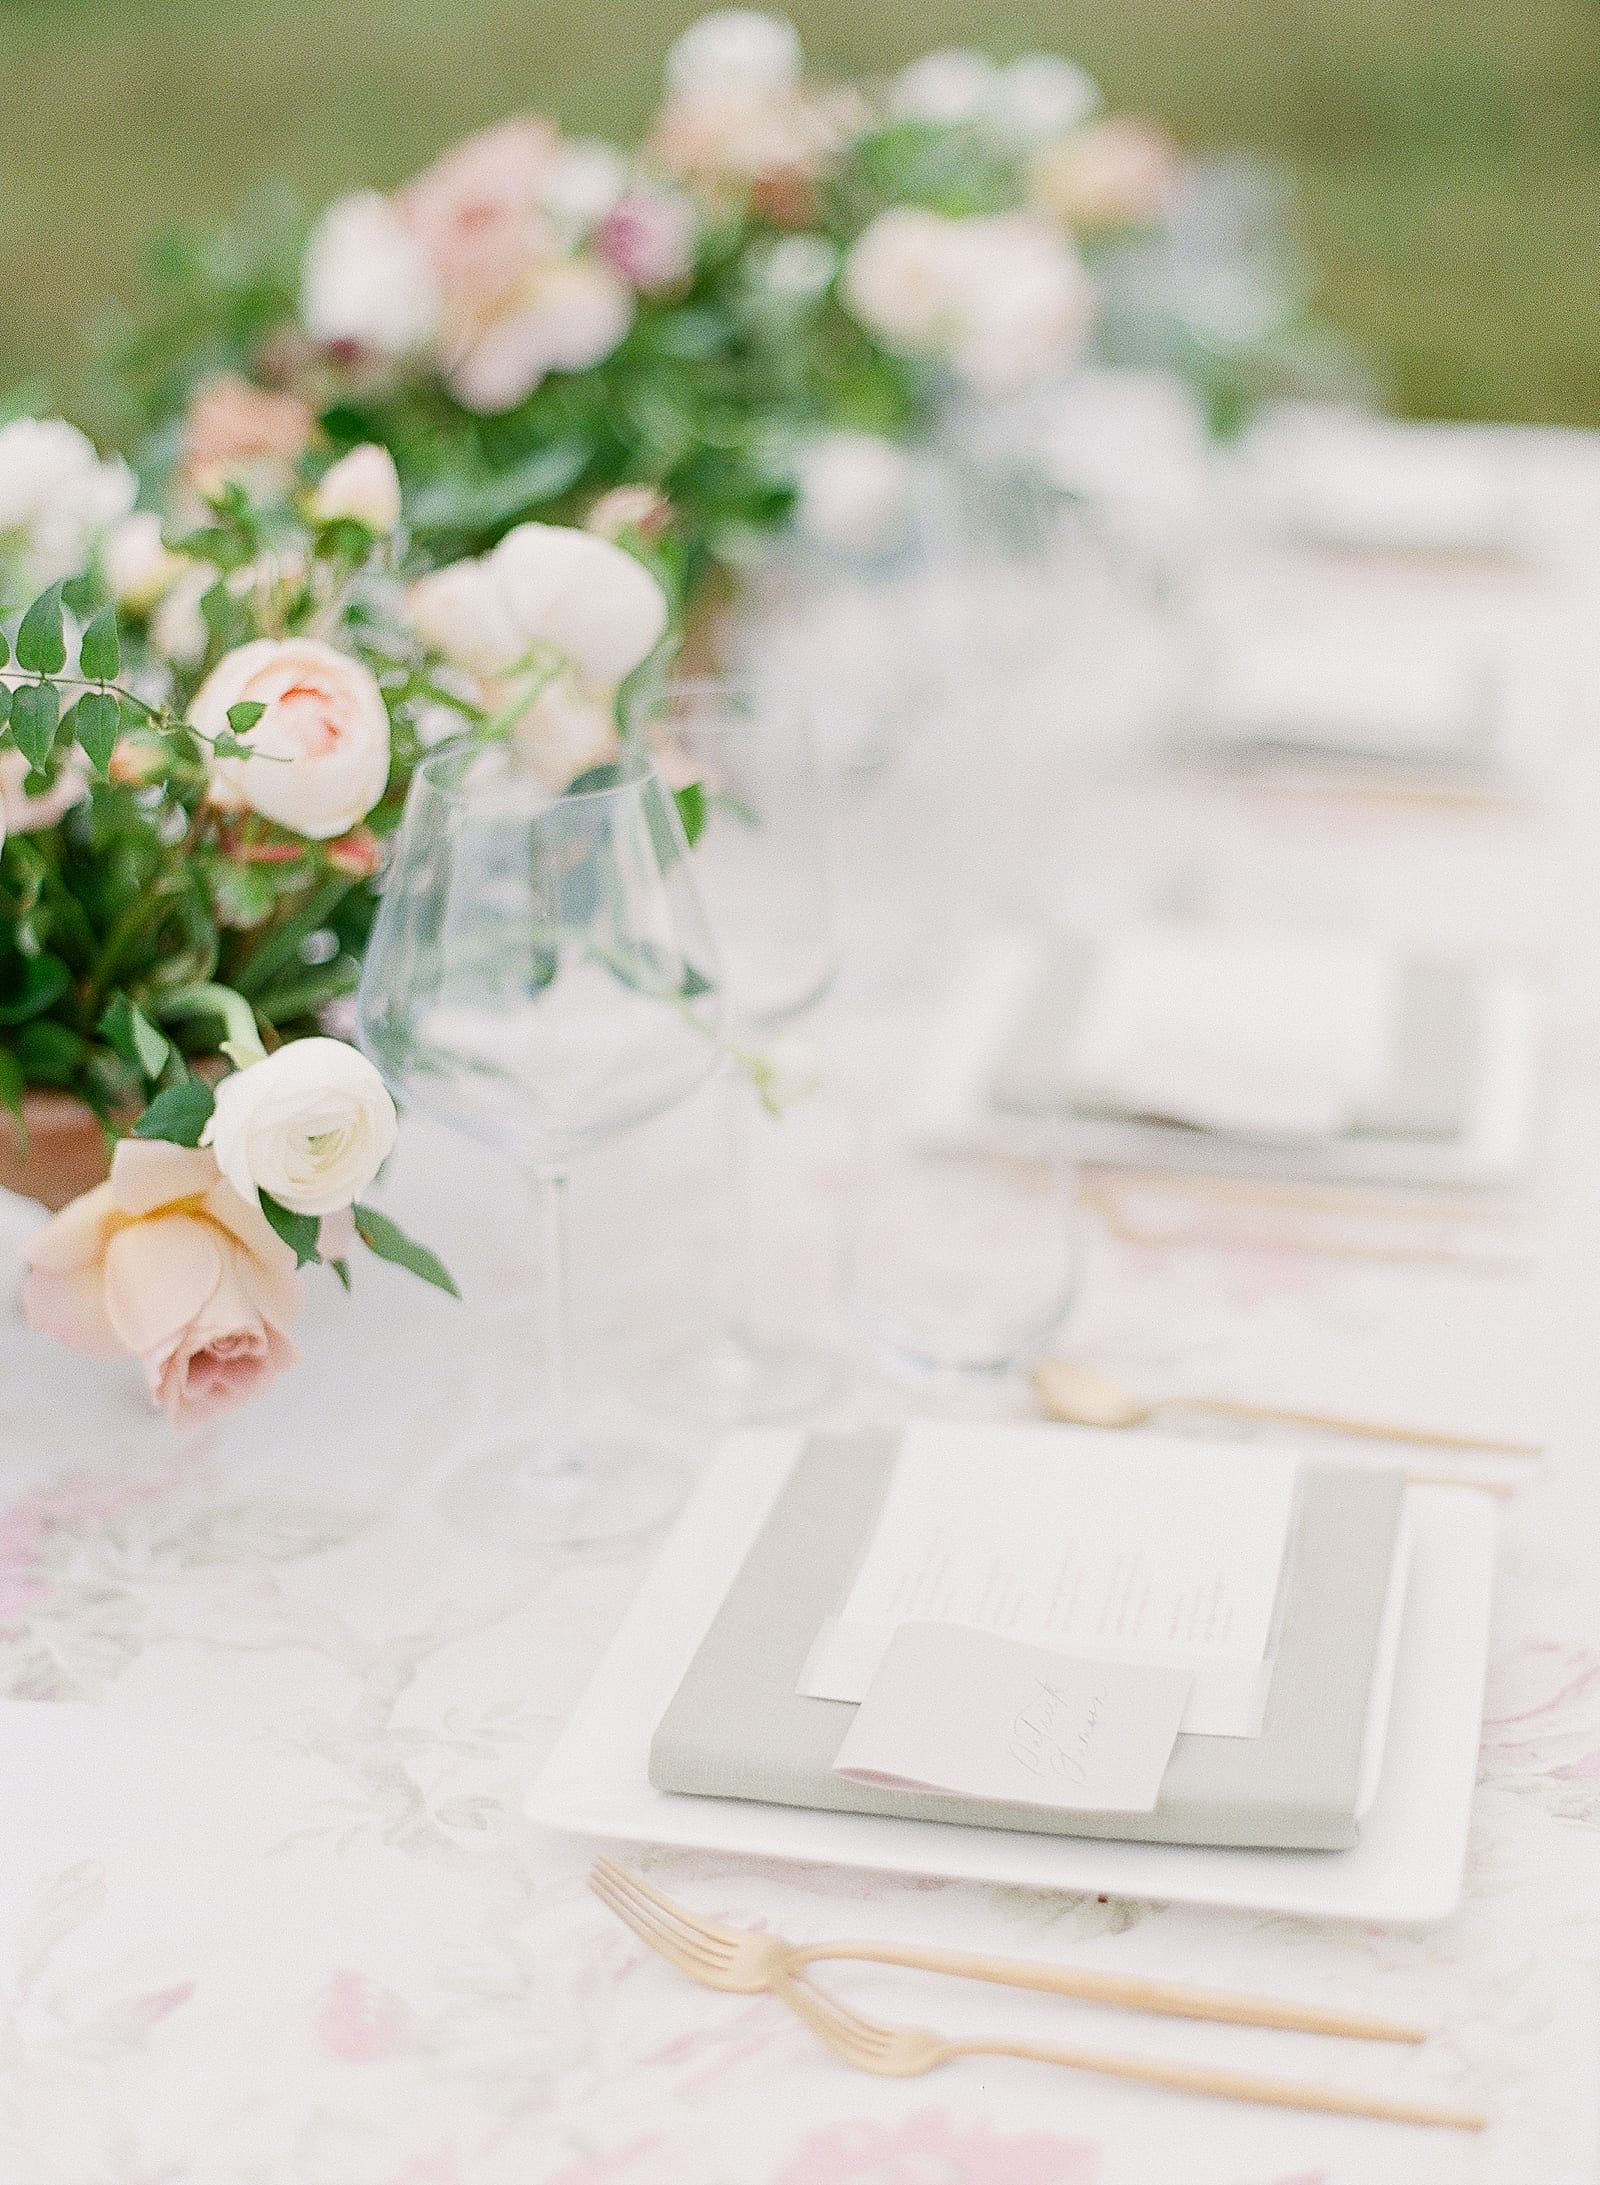 Wedding Reception Table by Janna Brown Photo